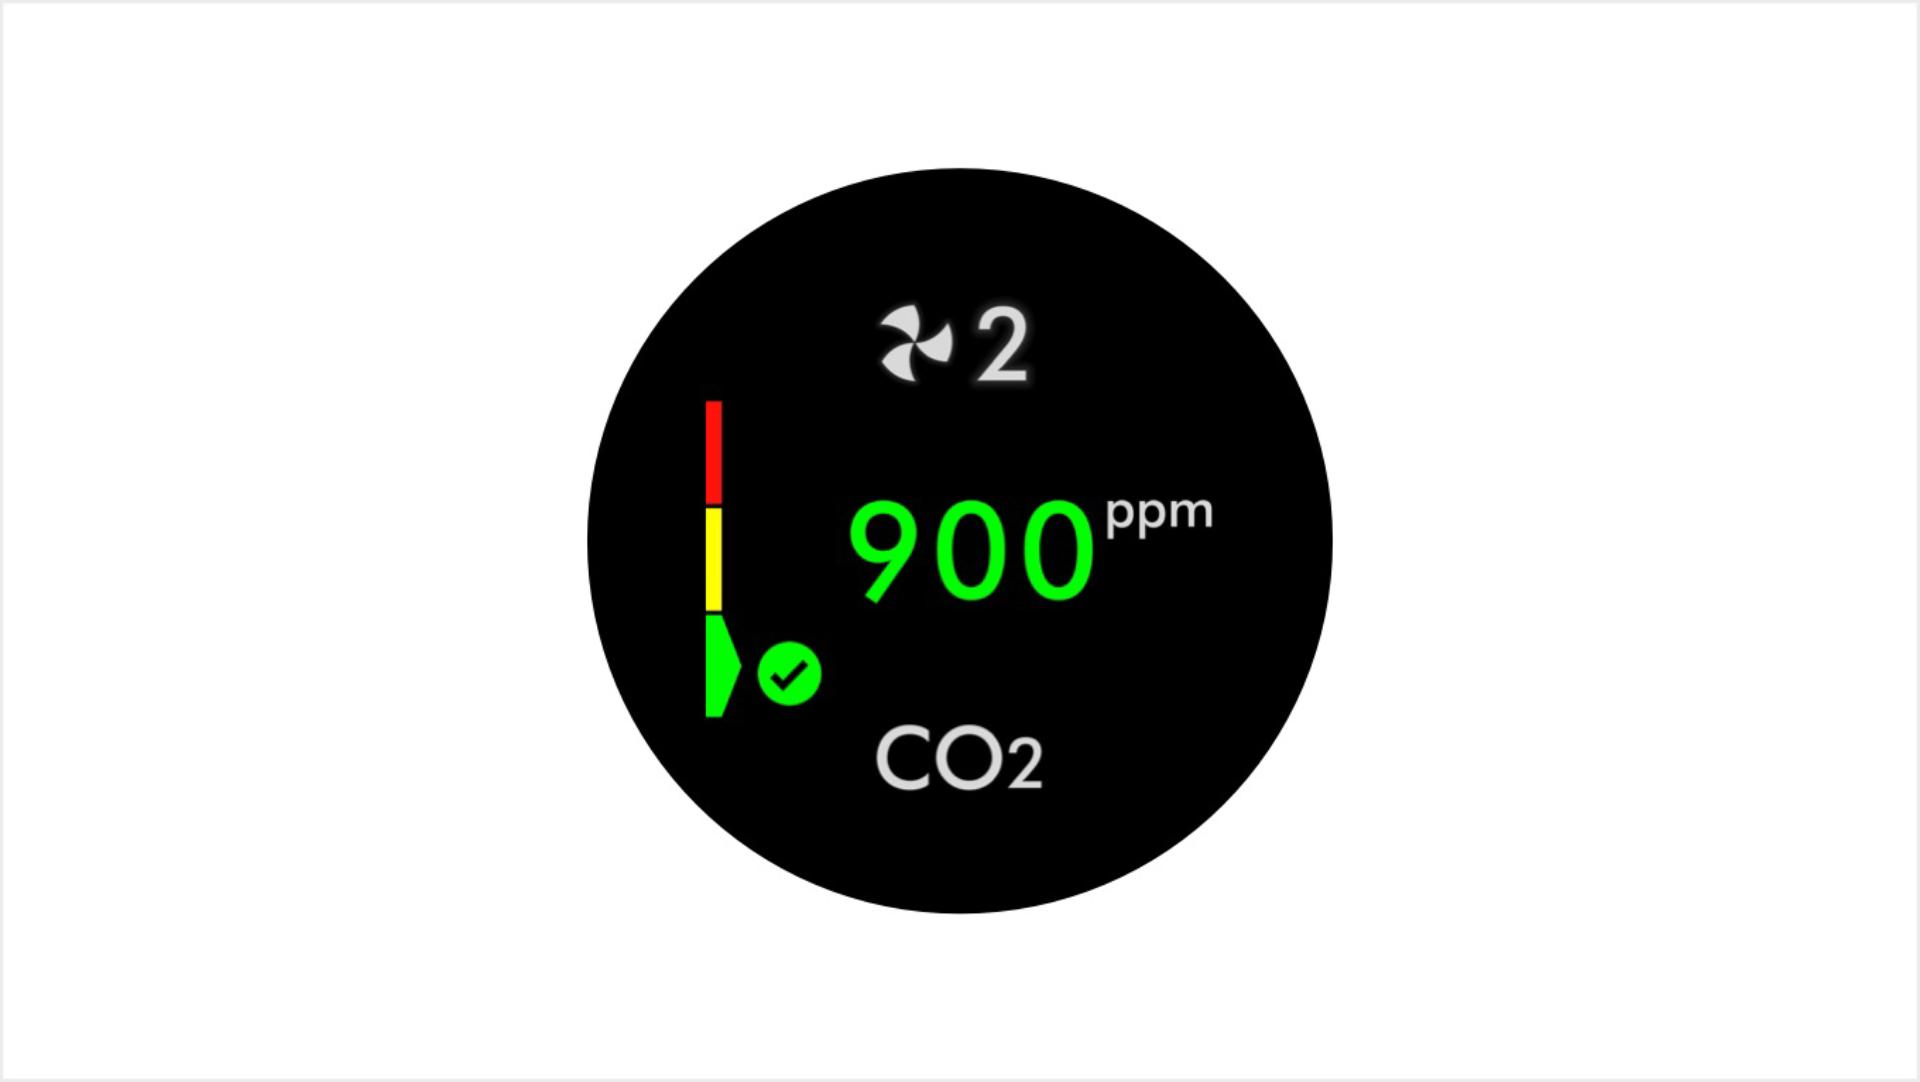 LCD screen showing low CO₂ 